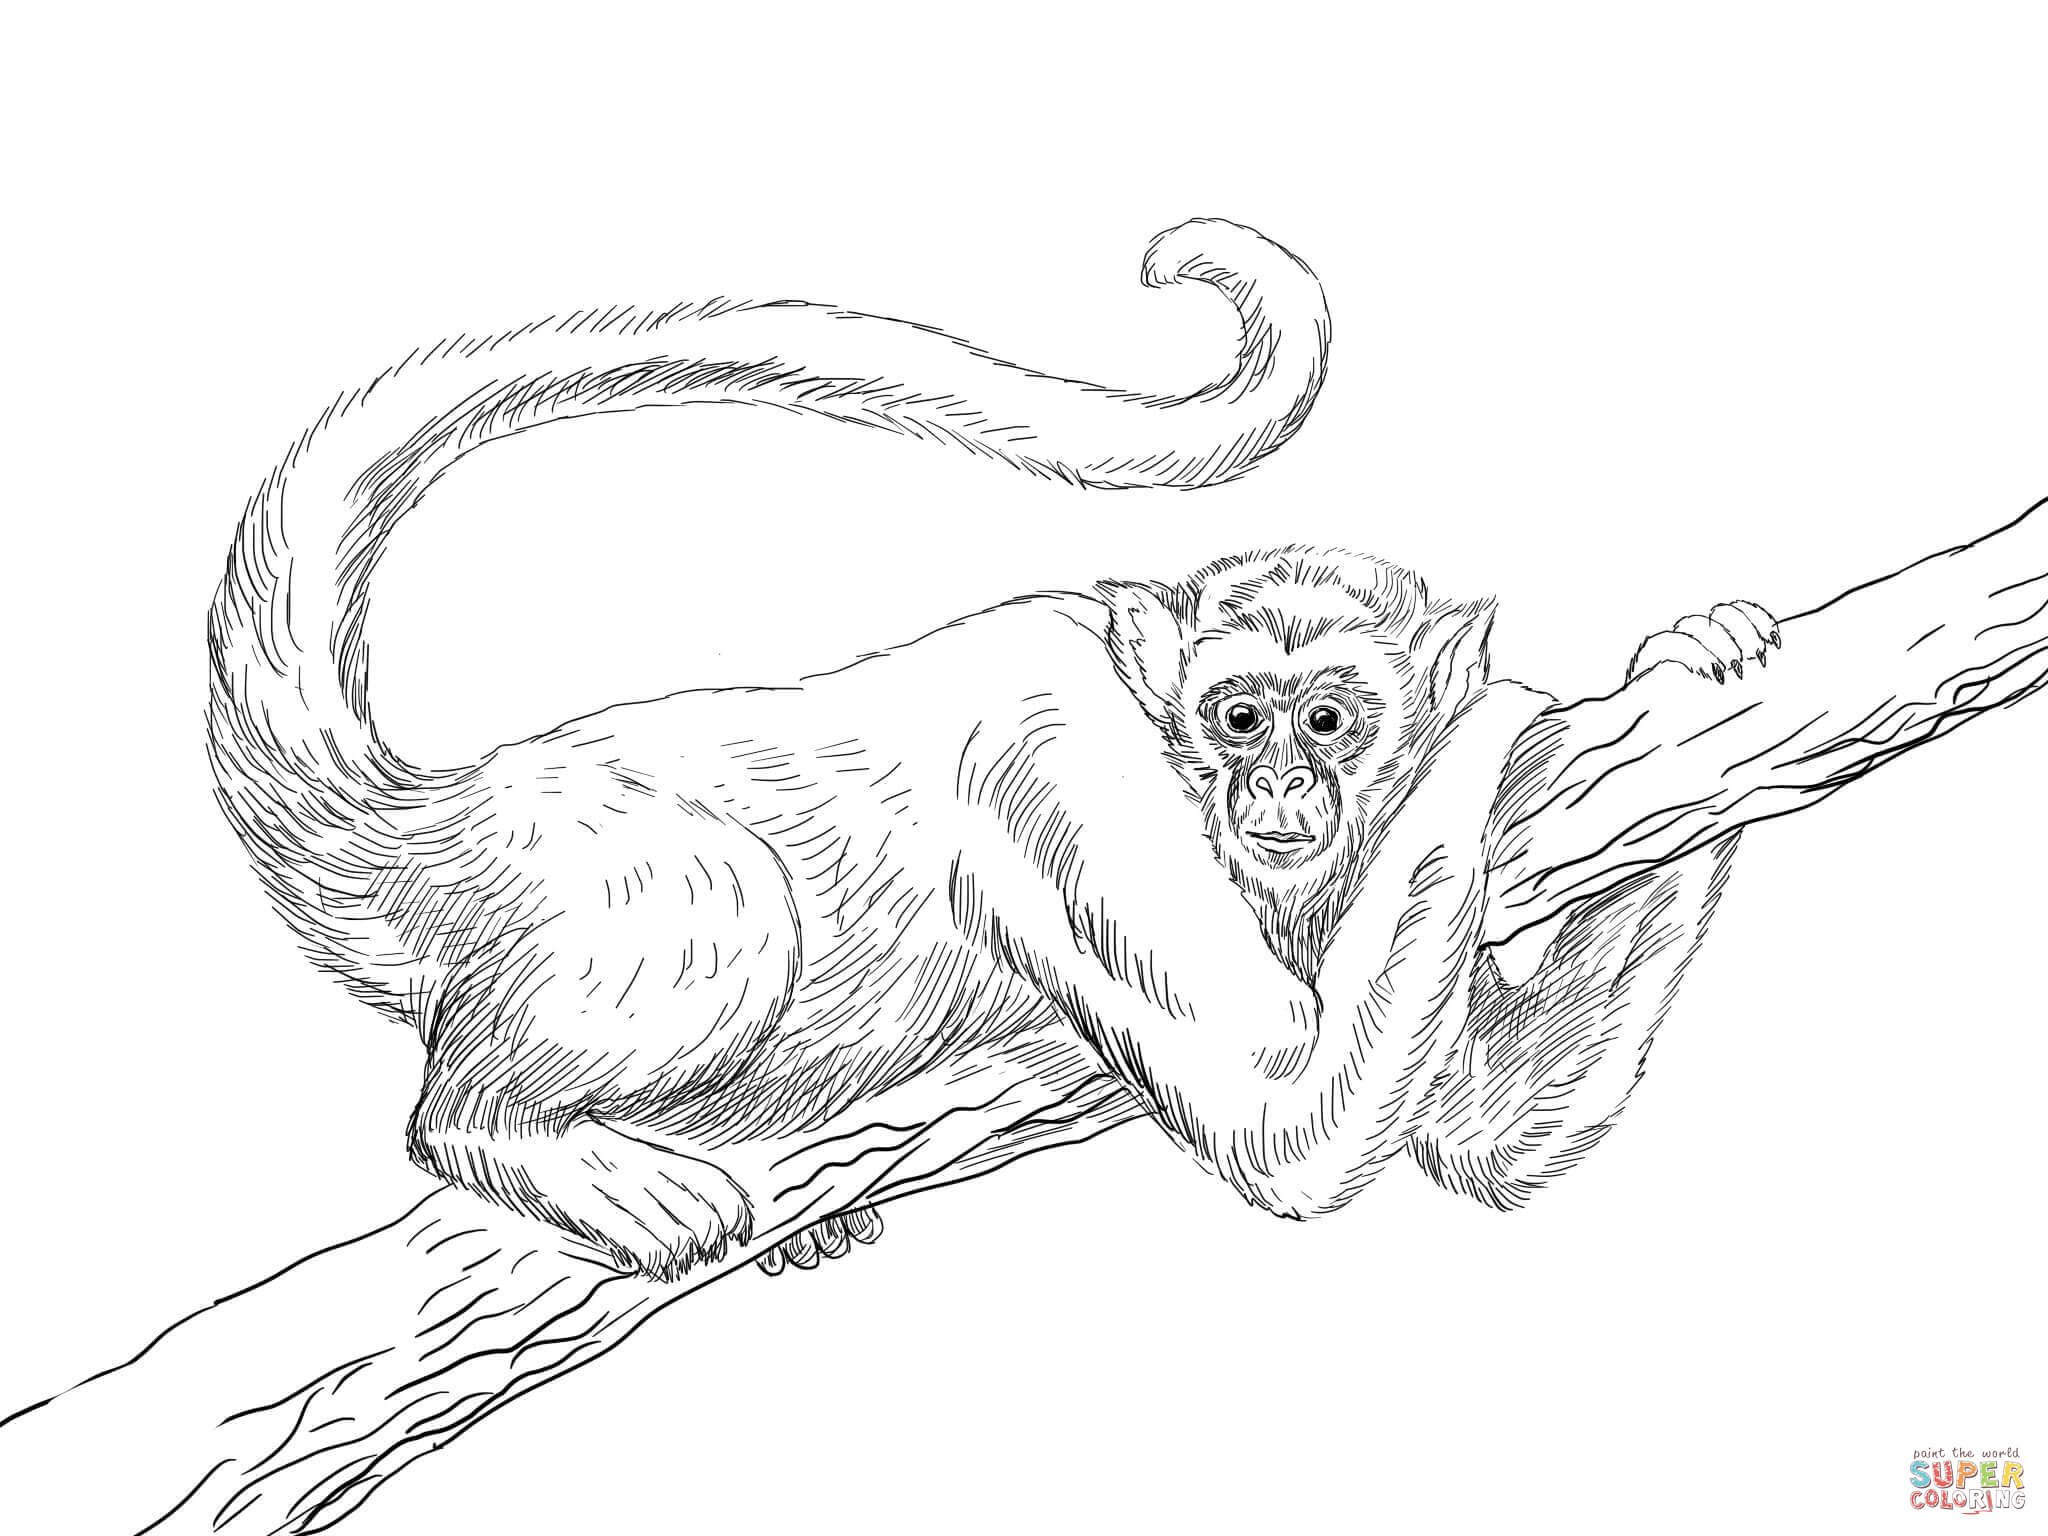 Squirrel Monkey coloring #4, Download drawings